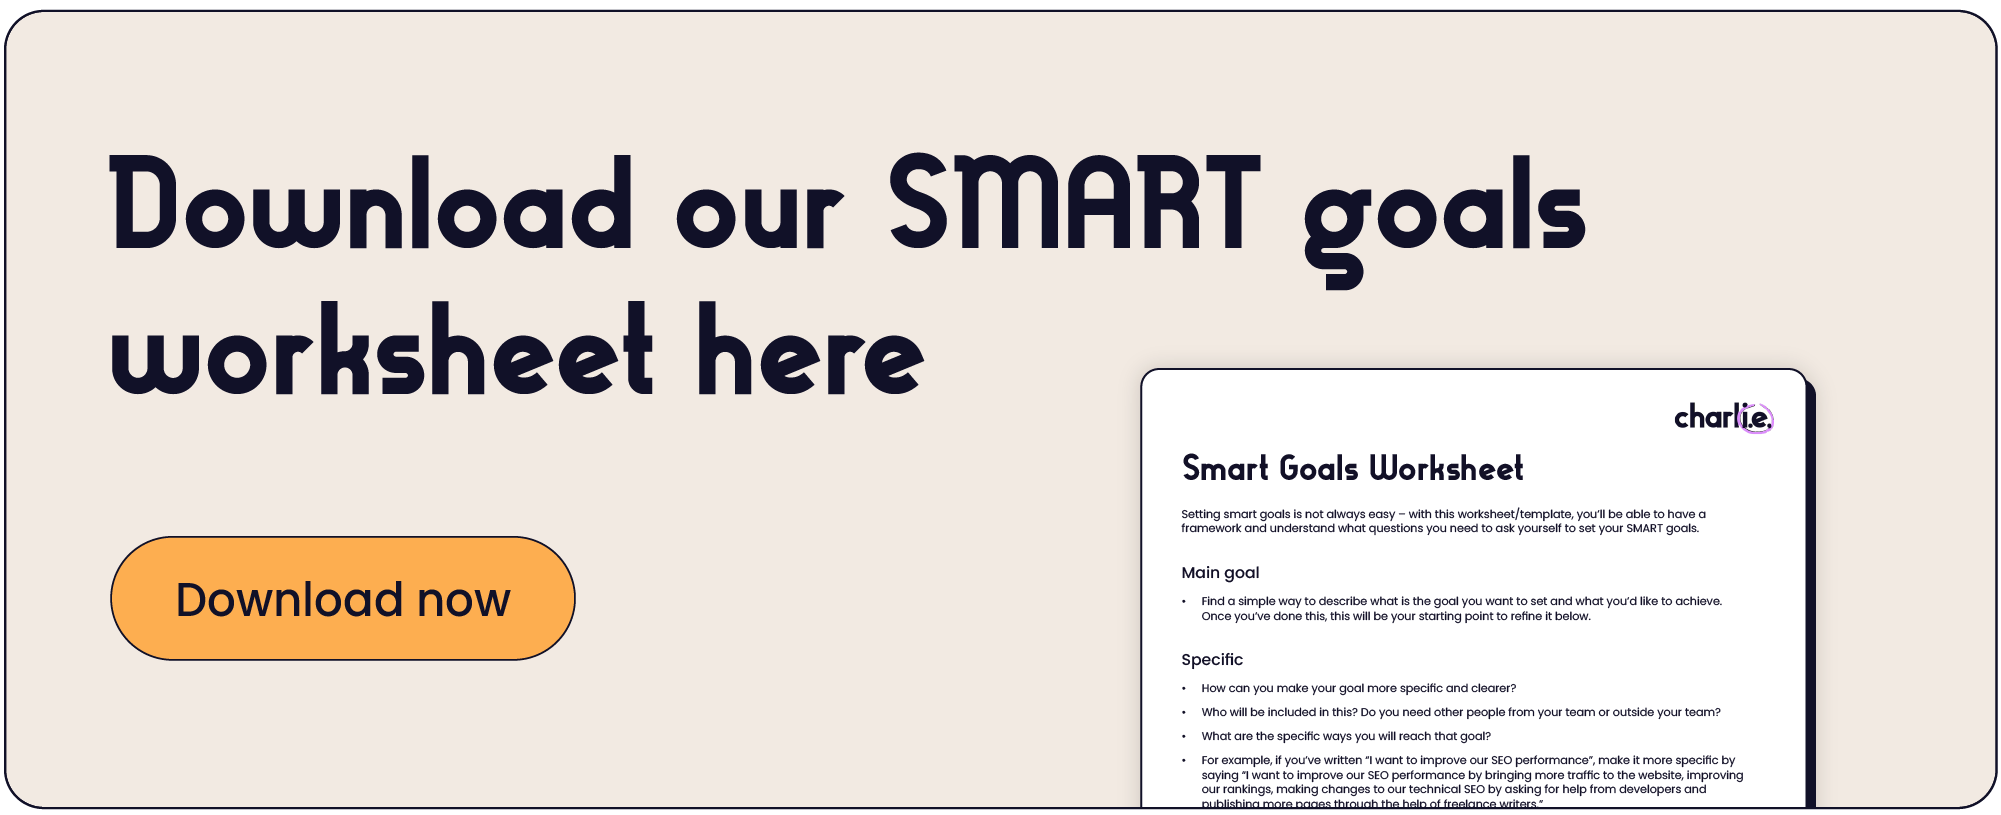 SMART goals – a senior product manager tells you all you need to know